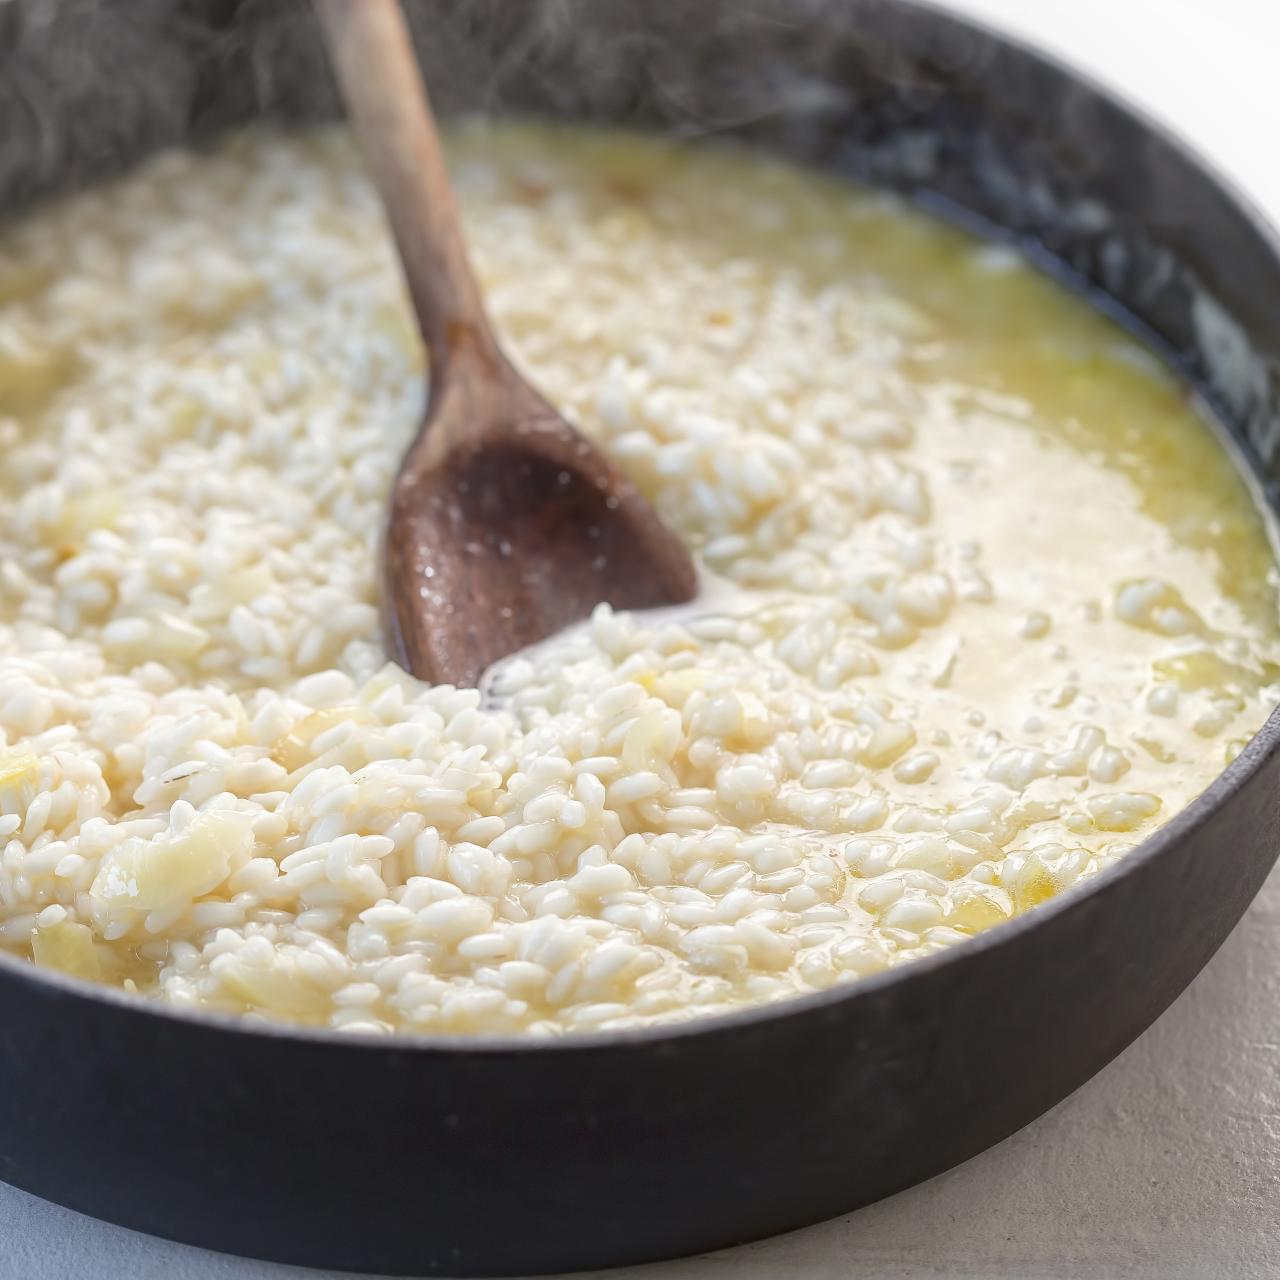 What Is Risotto? And How to Make Risotto, Cooking School